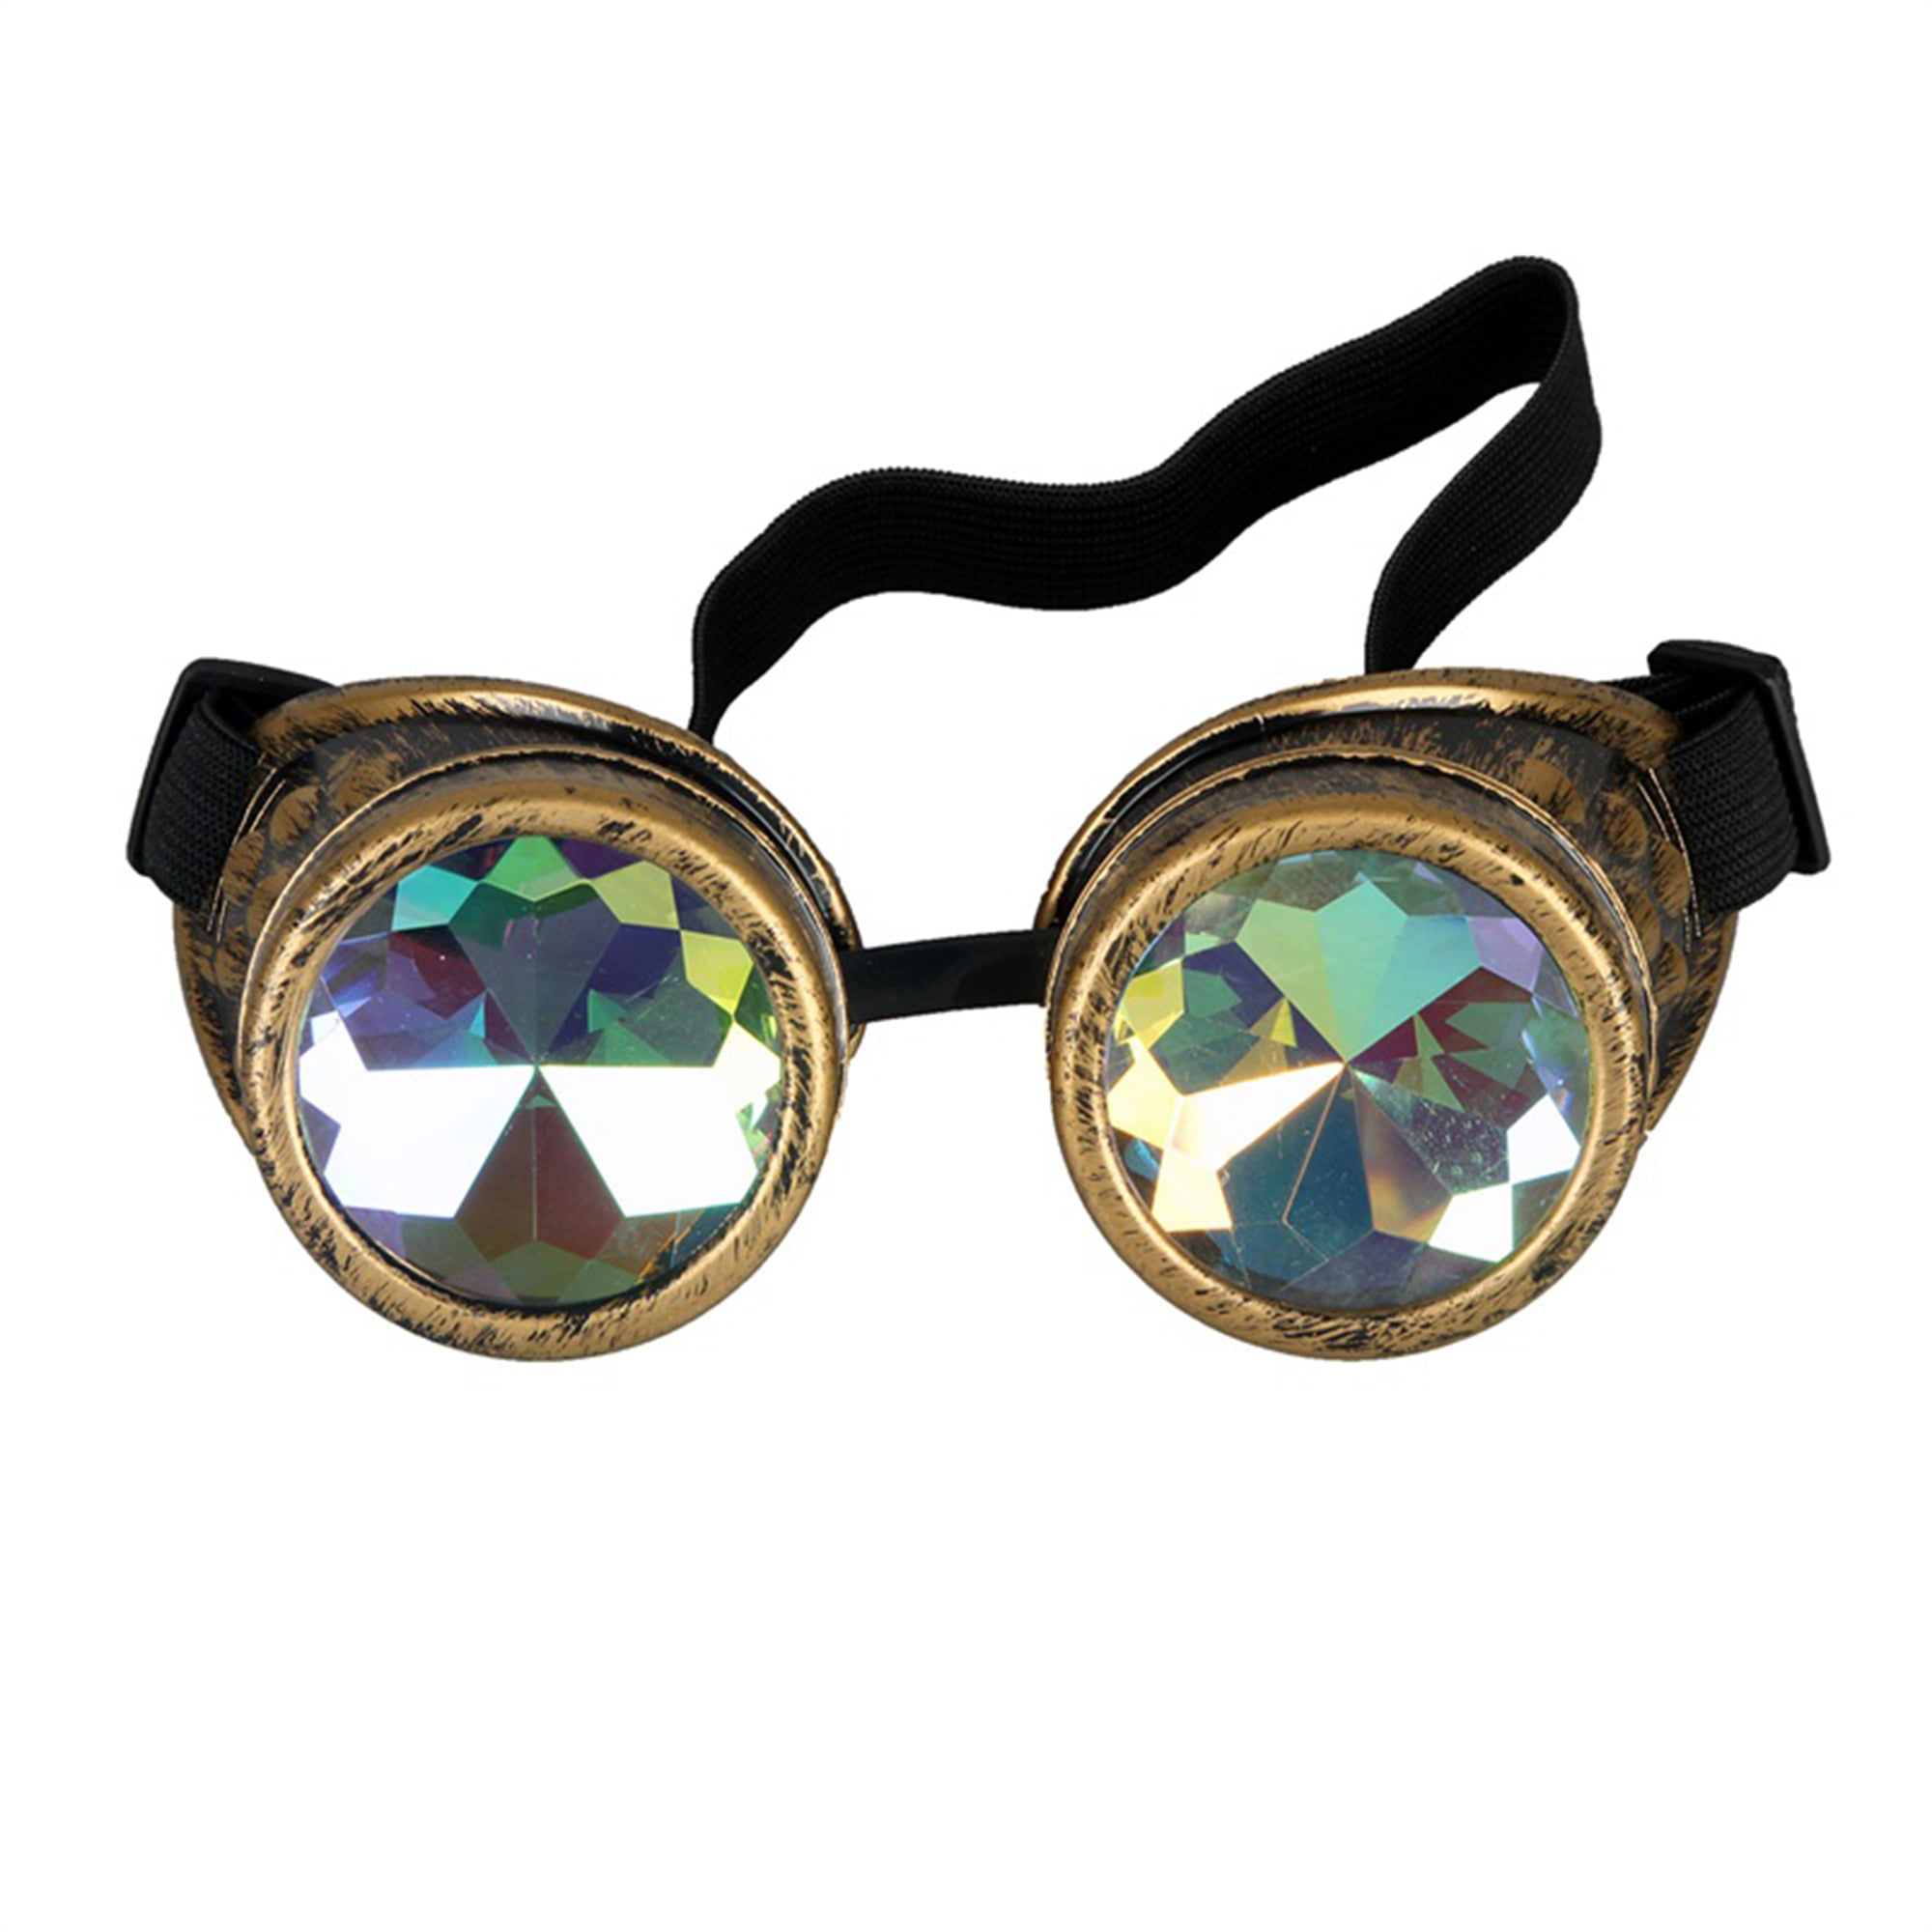 AFUT New Sell Kaleidoscope Goggles Cyber Real Crystal Prism Steampunk Rainbow Lenses for Halloween Goggles Shows 